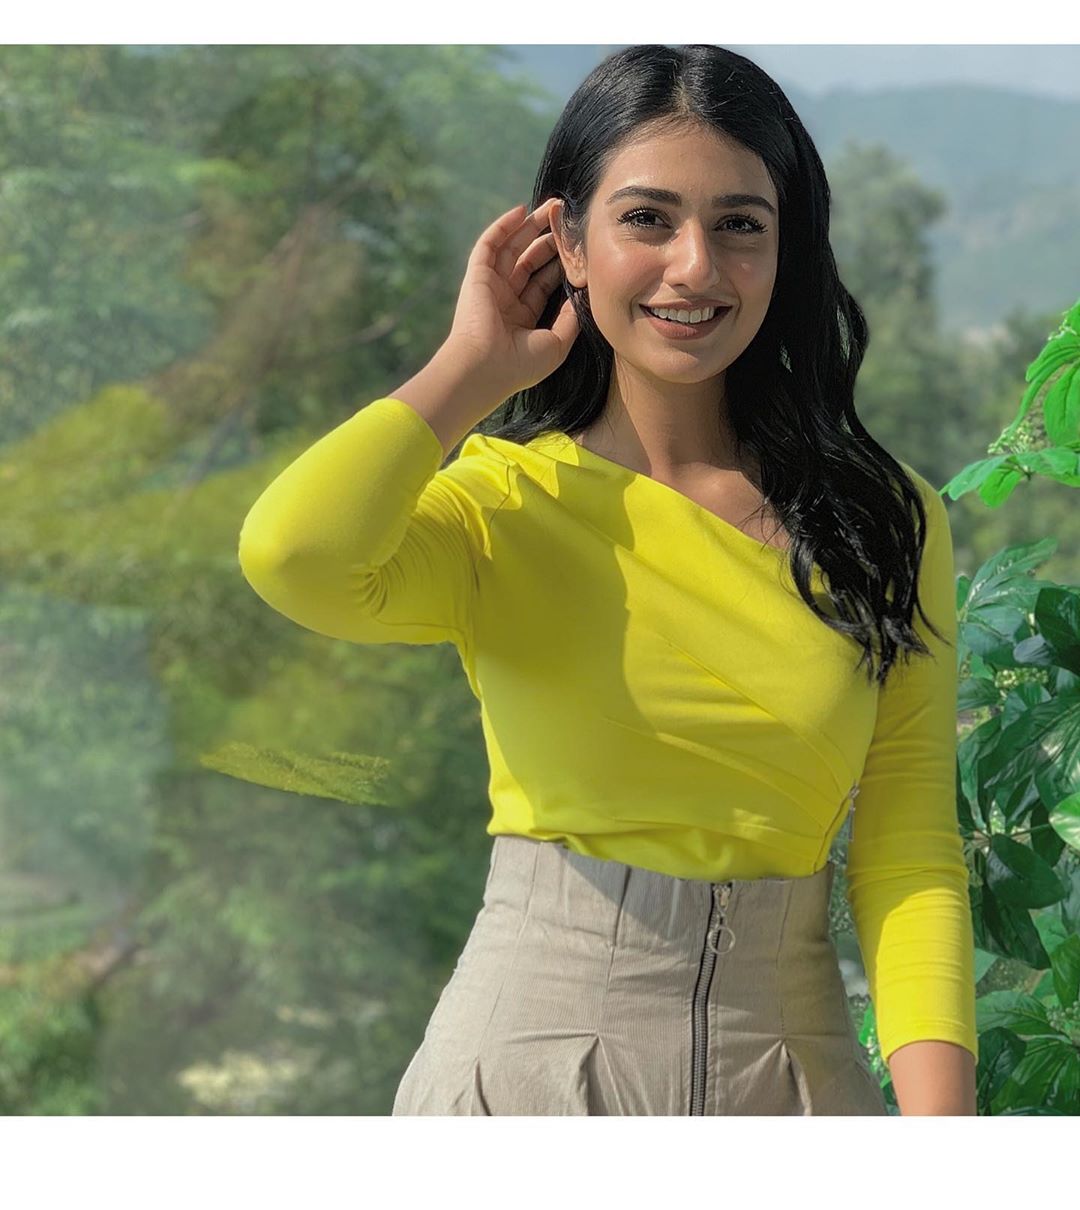 Sarah Khan Beautiful Collection of Pictures from Instagram